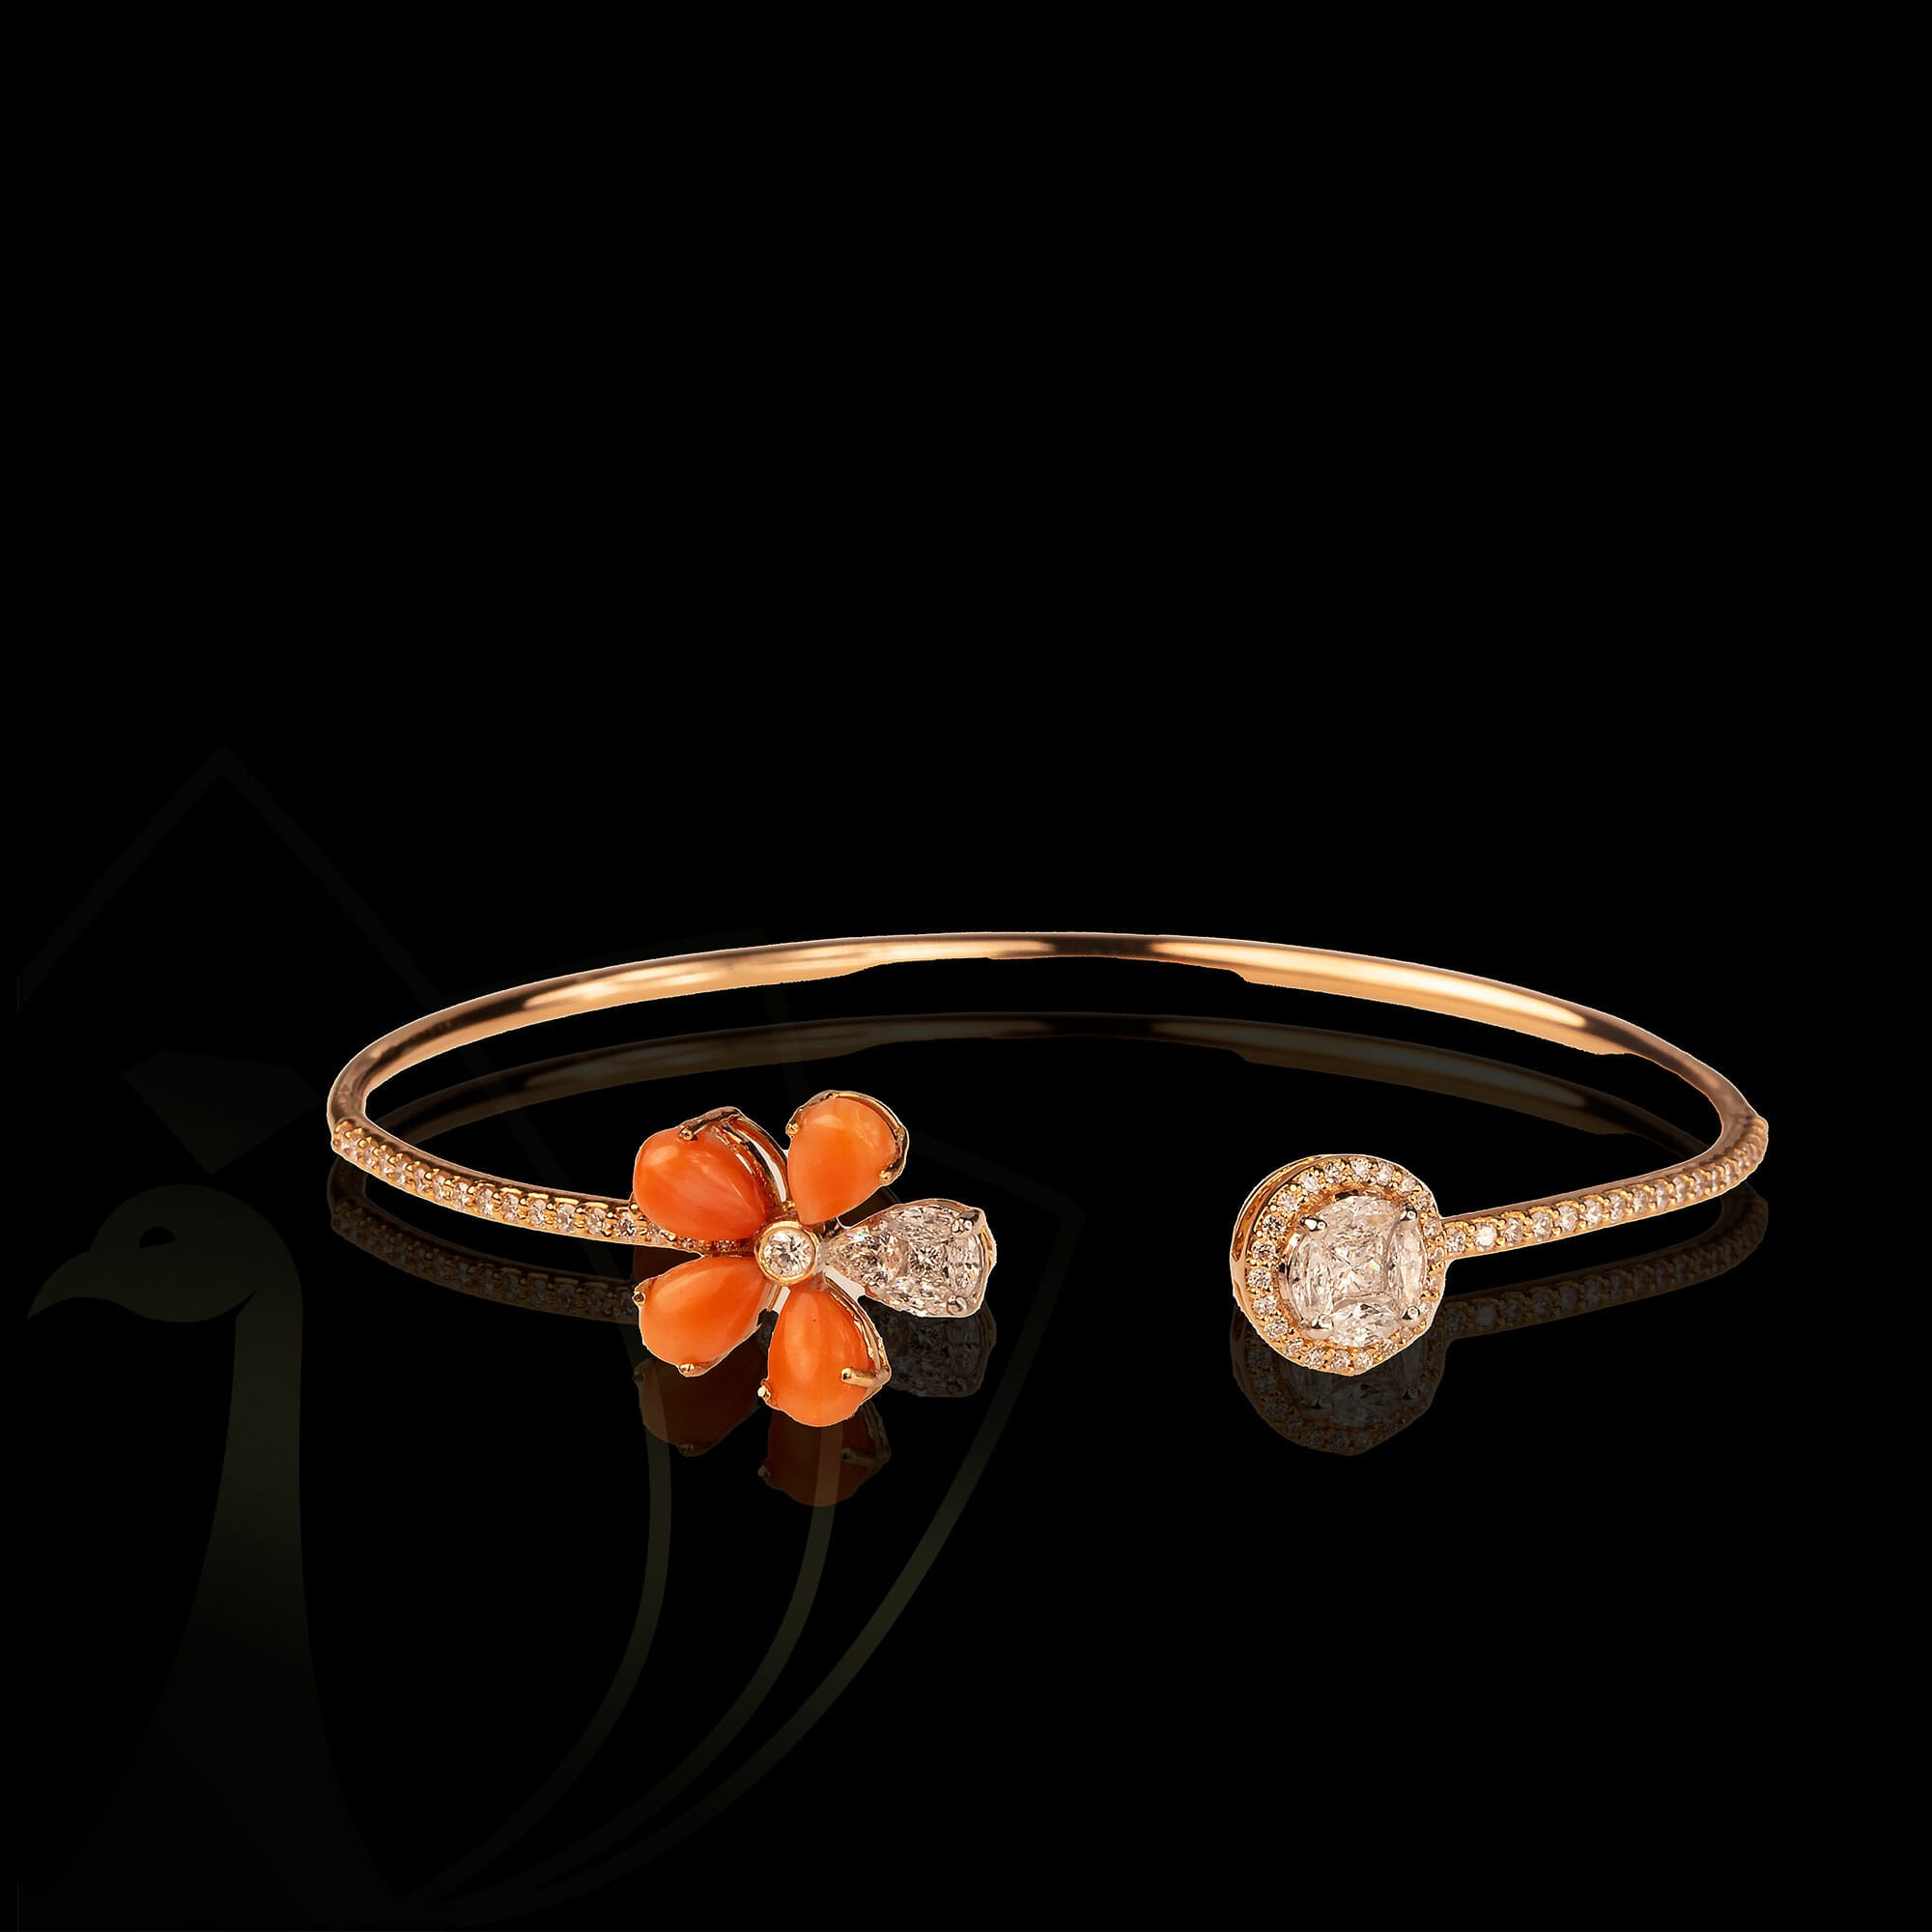 Bountiful Blossom Diamond Bracelet from our exclusive Gulz Collection